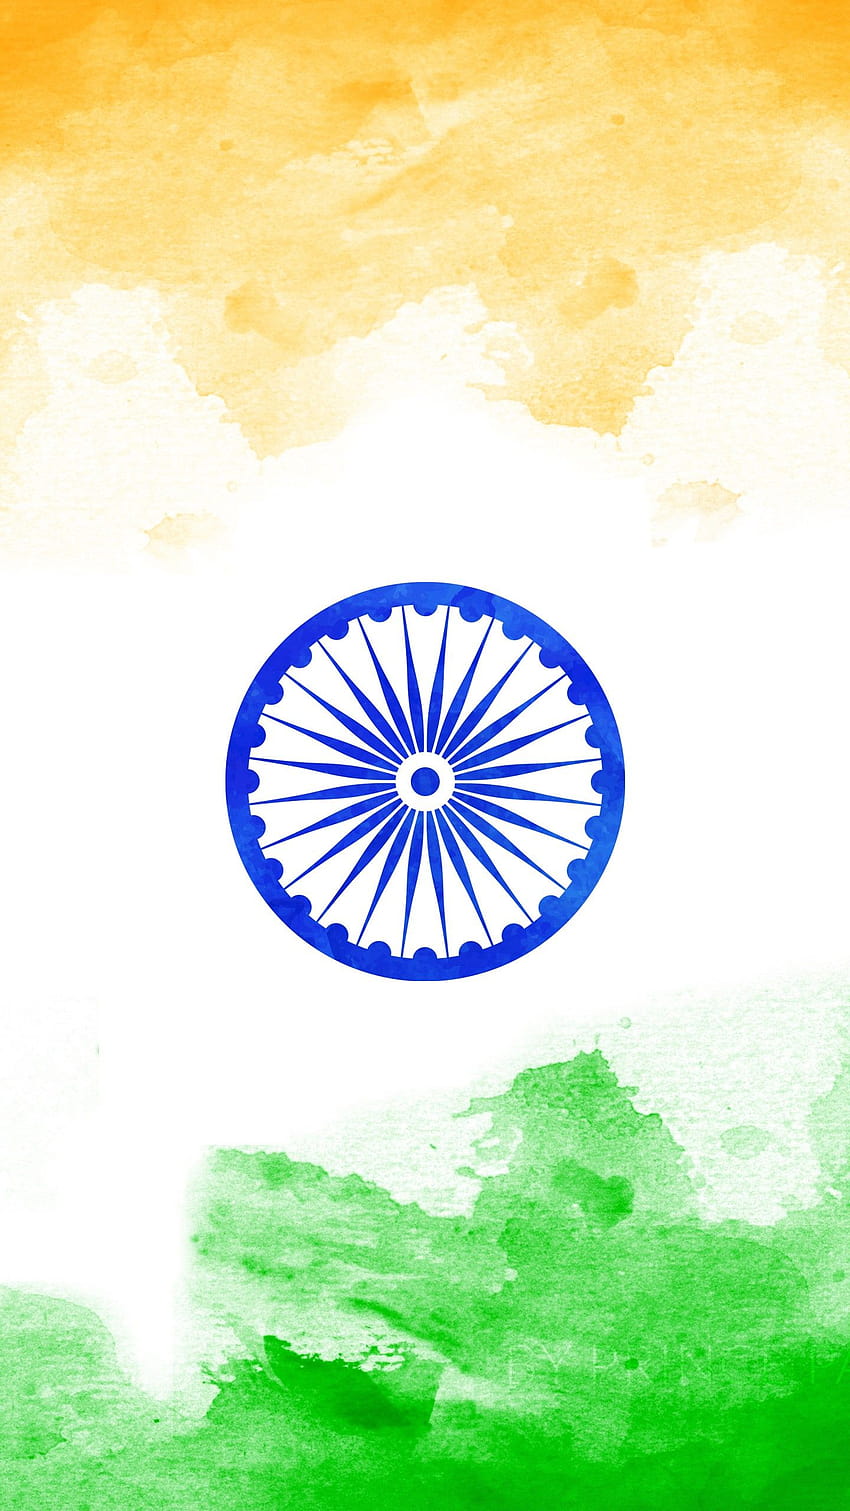 Tricolour Indian Flag, android mobile flag HD phone wallpaper